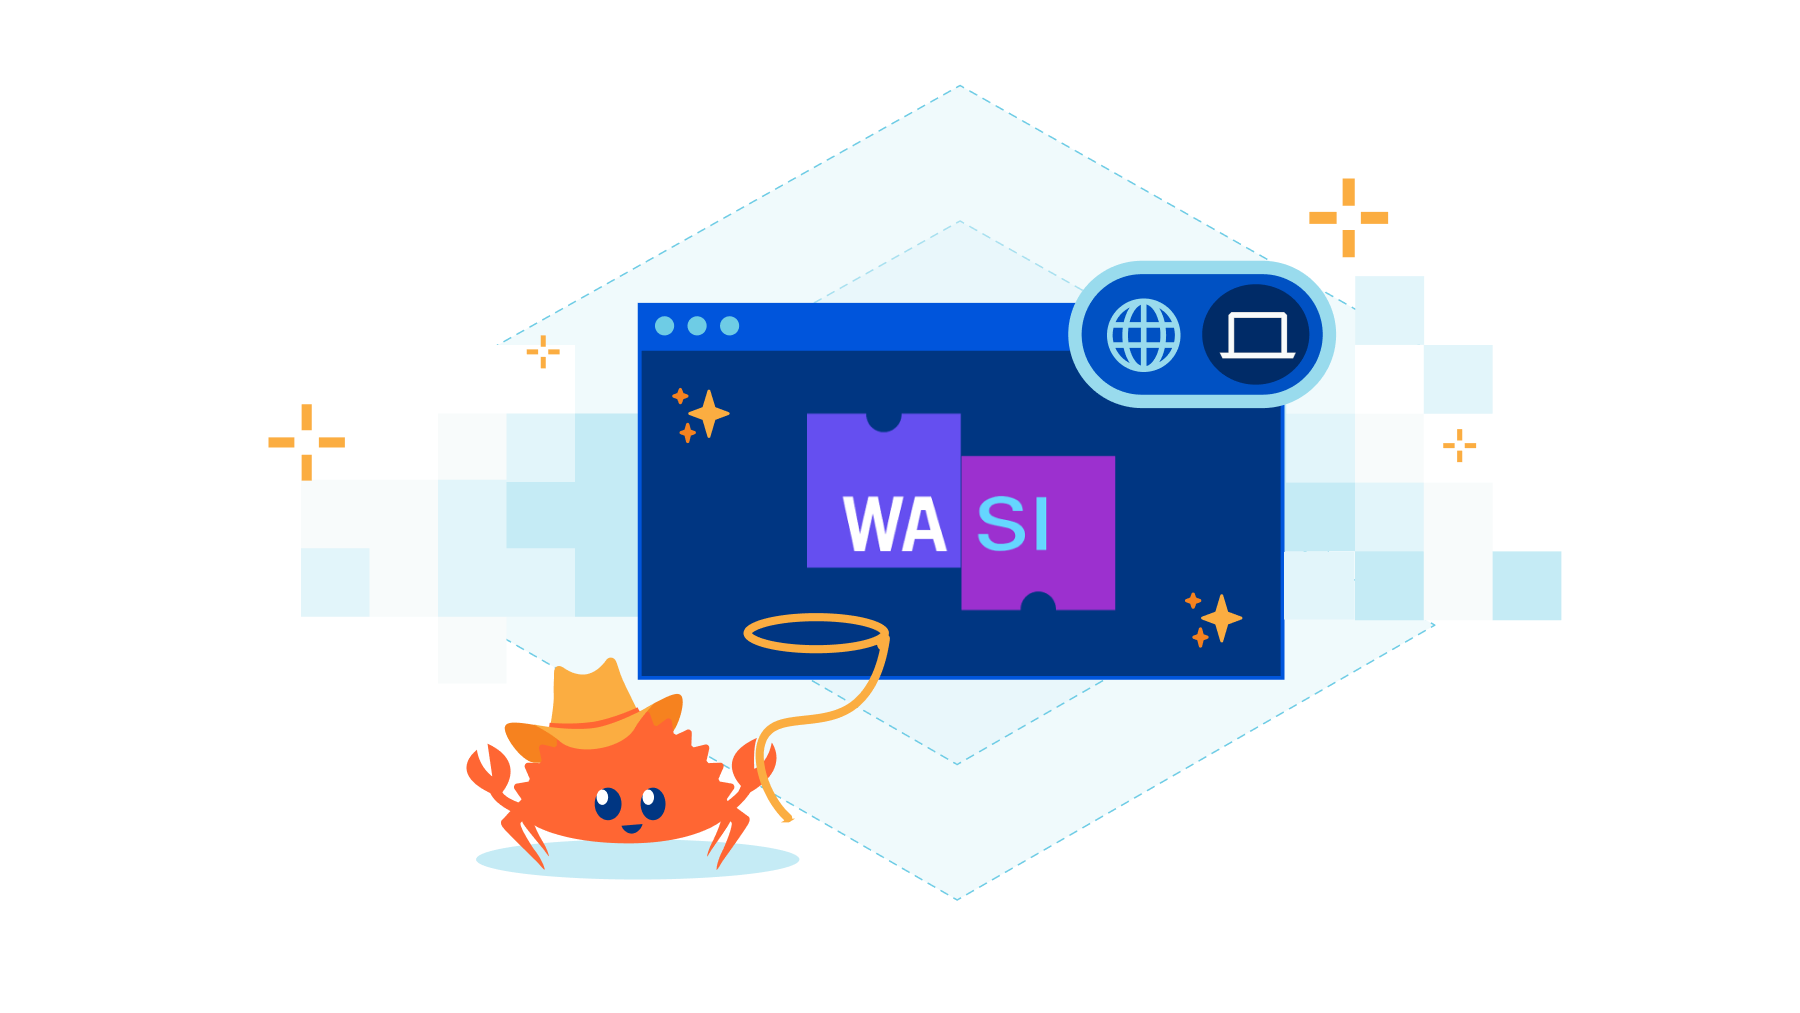 Running Zig with WASI on Cloudflare Workers